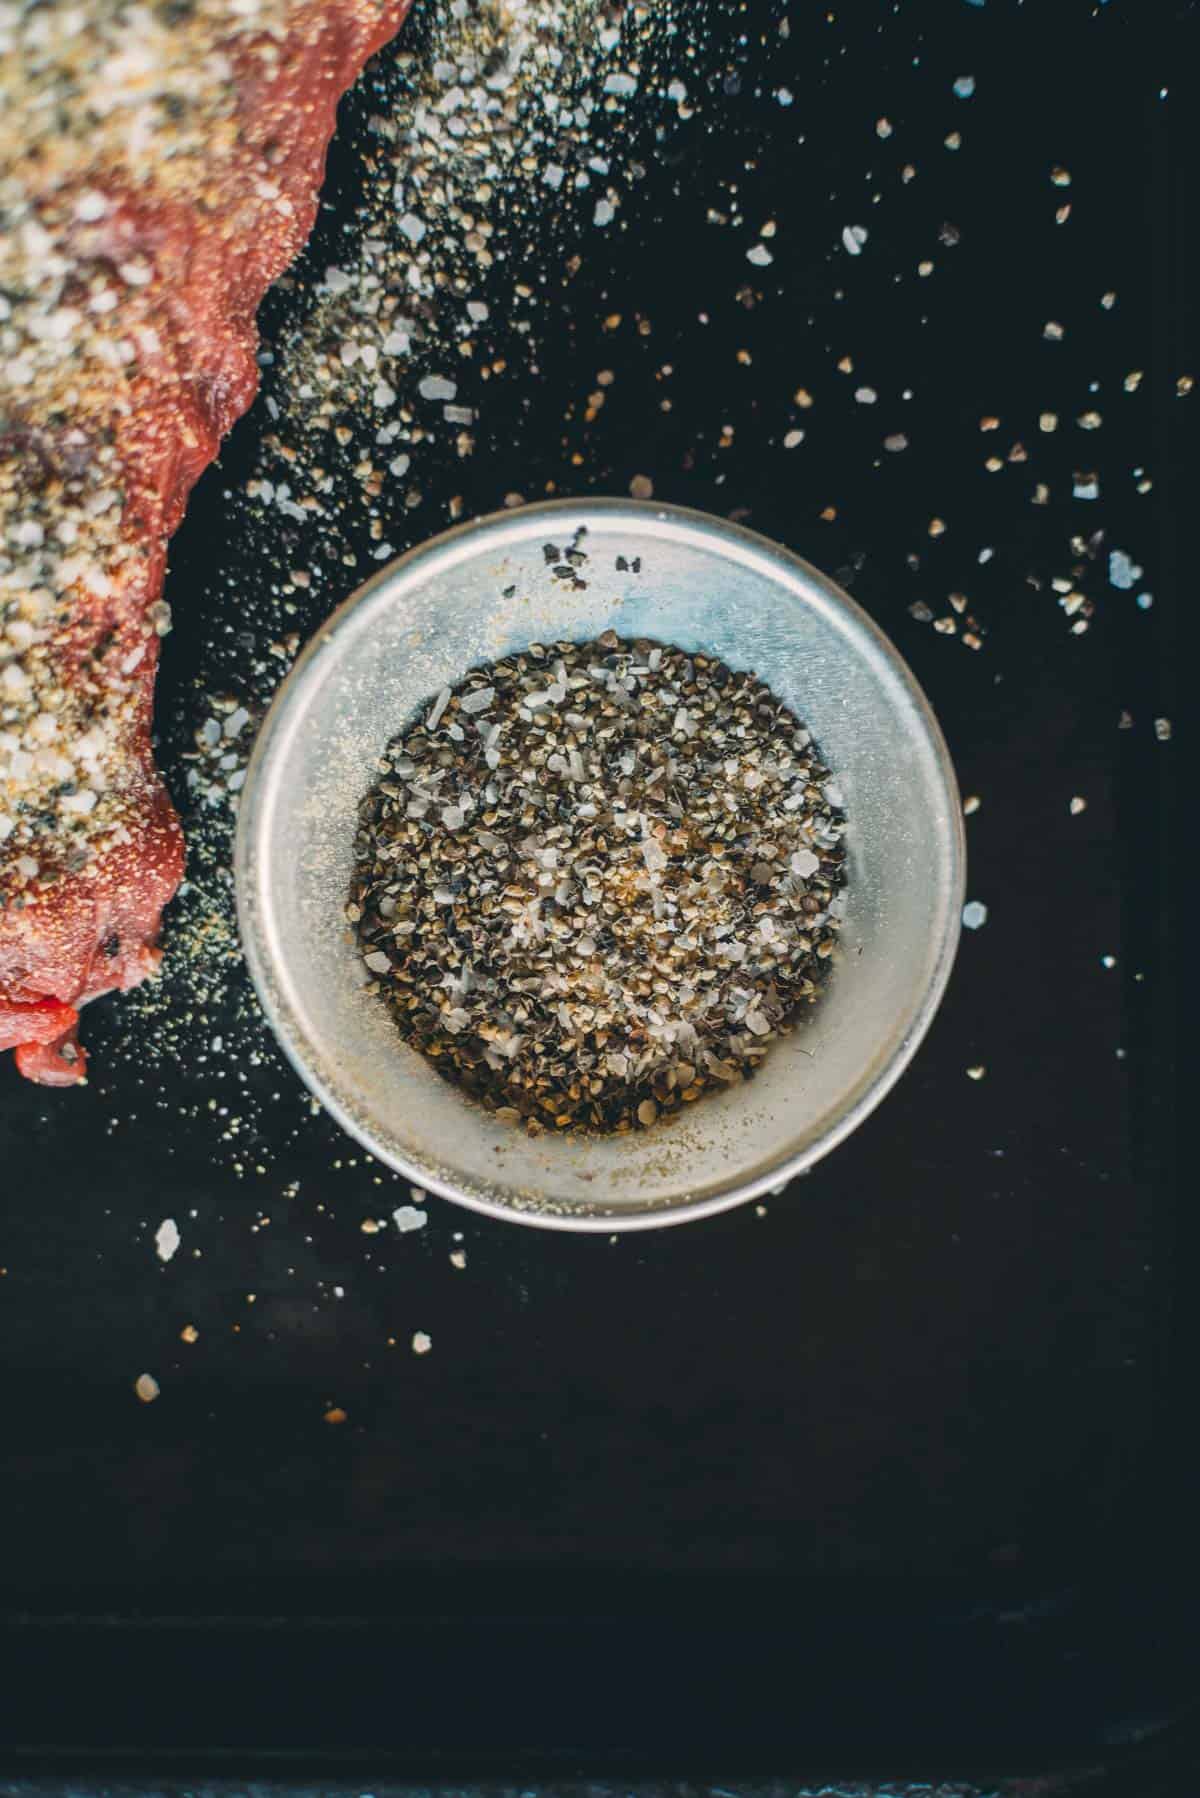 A small metal bowl filled with ground black pepper, salt and granulated garlic sits on a black surface next to a piece of raw, seasoned meat.